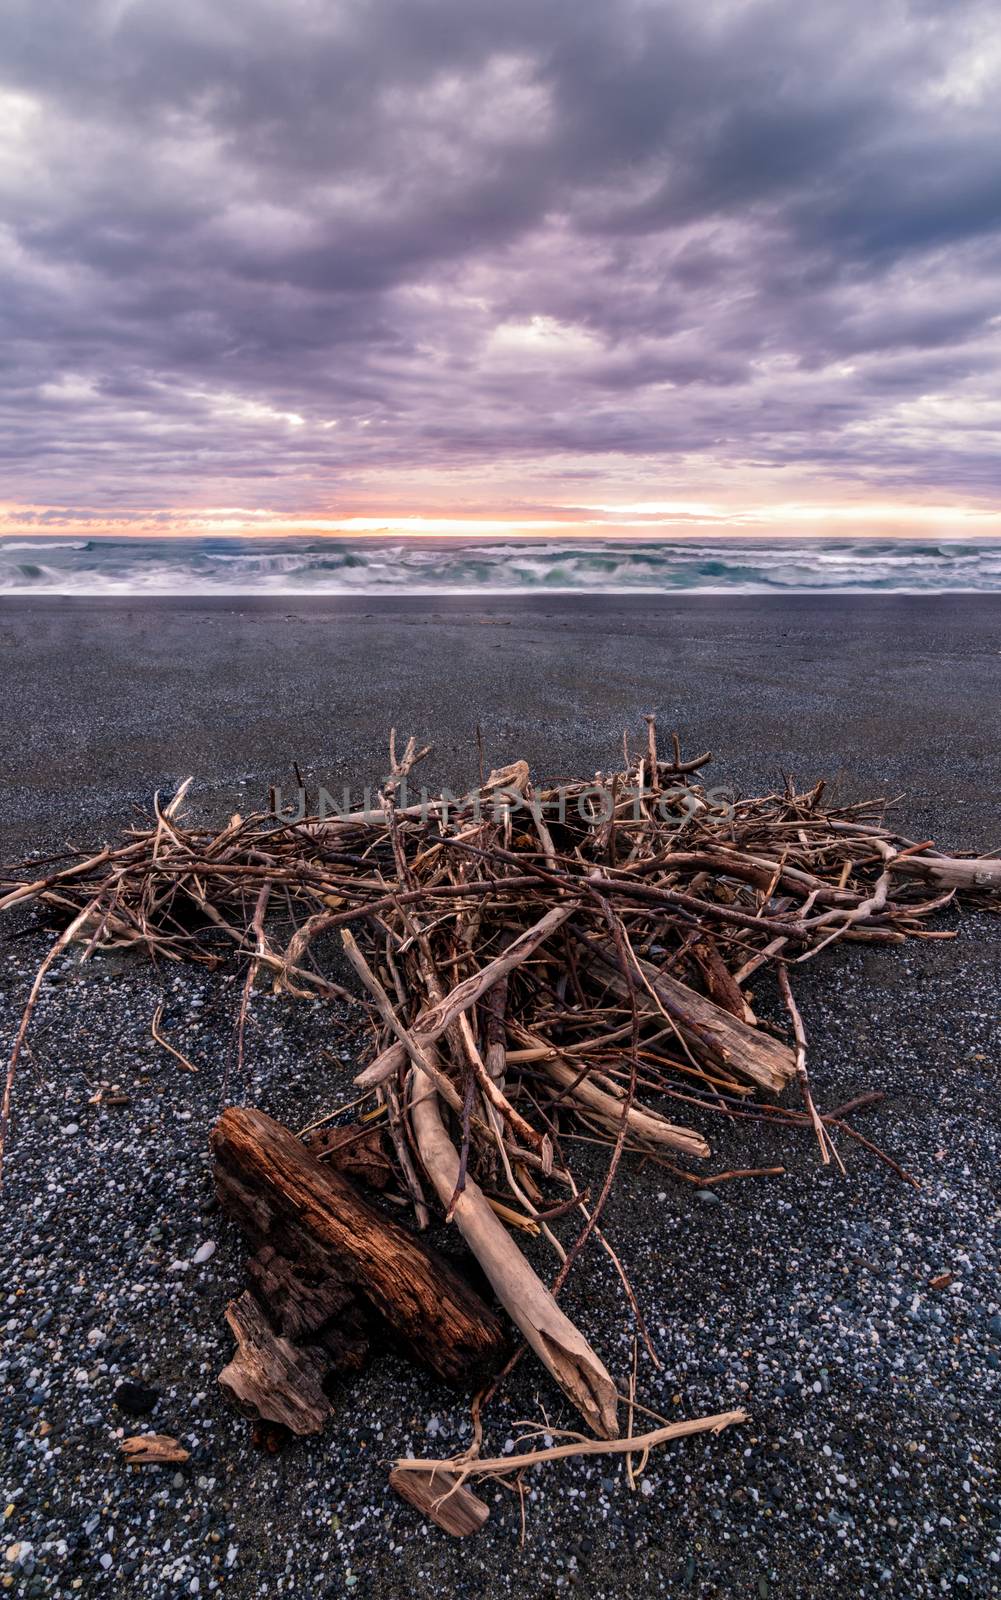 A Pile of Driftwood at a Beach, Trinidad, California by backyard_photography